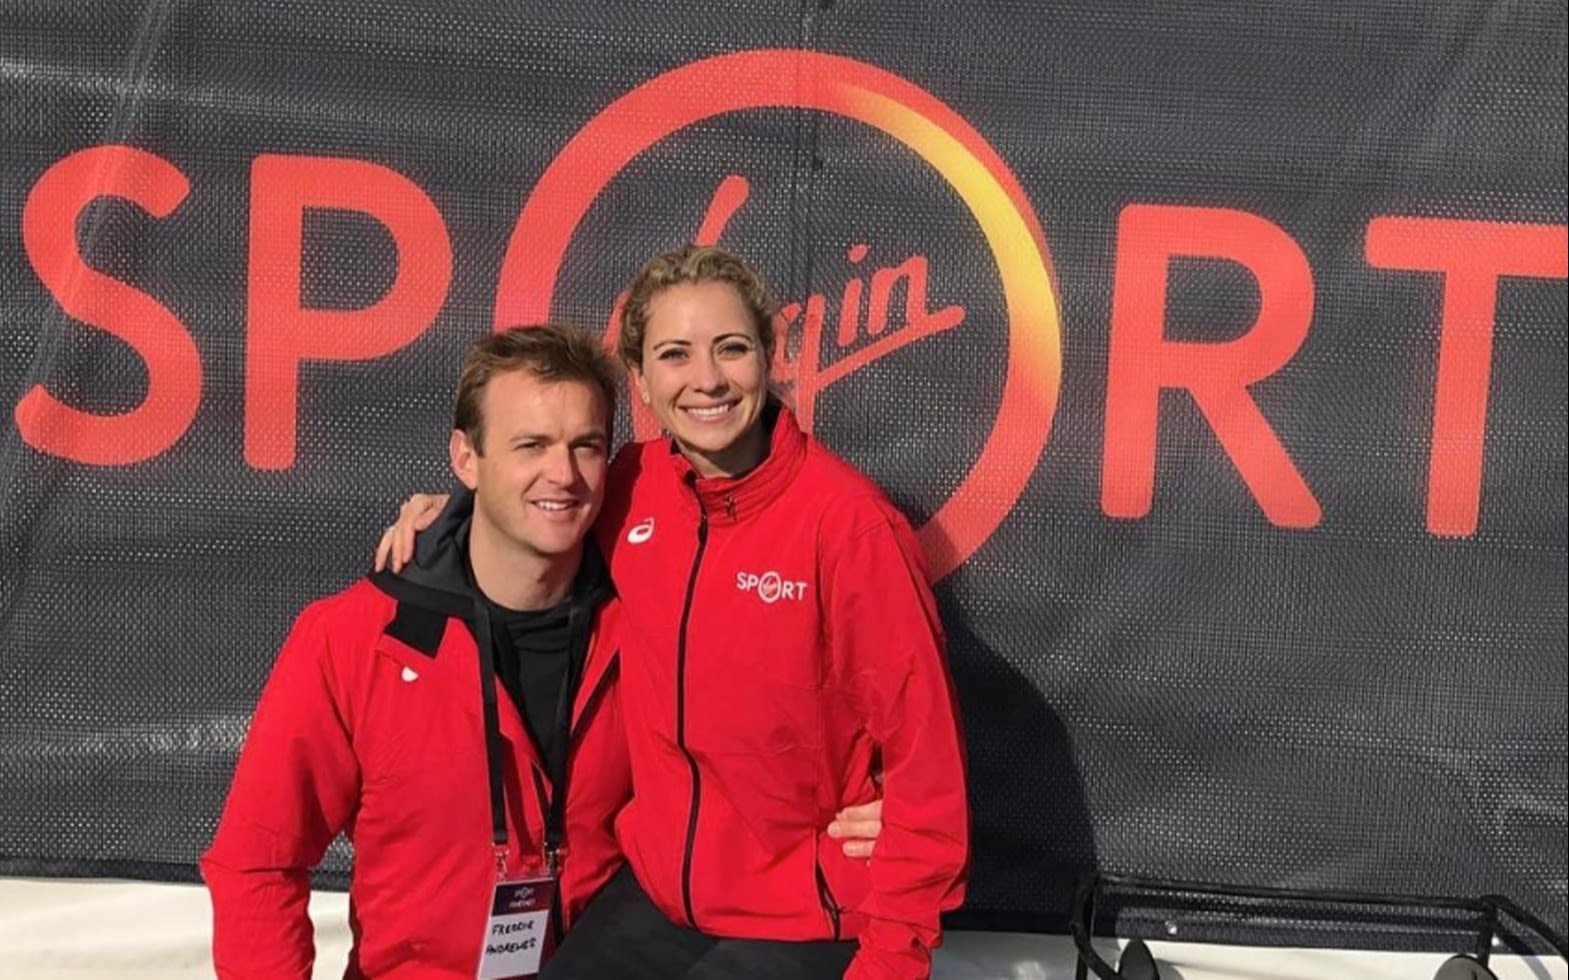 Freddie Andrewes and Holly Branson in front of the Virgin Sport logo